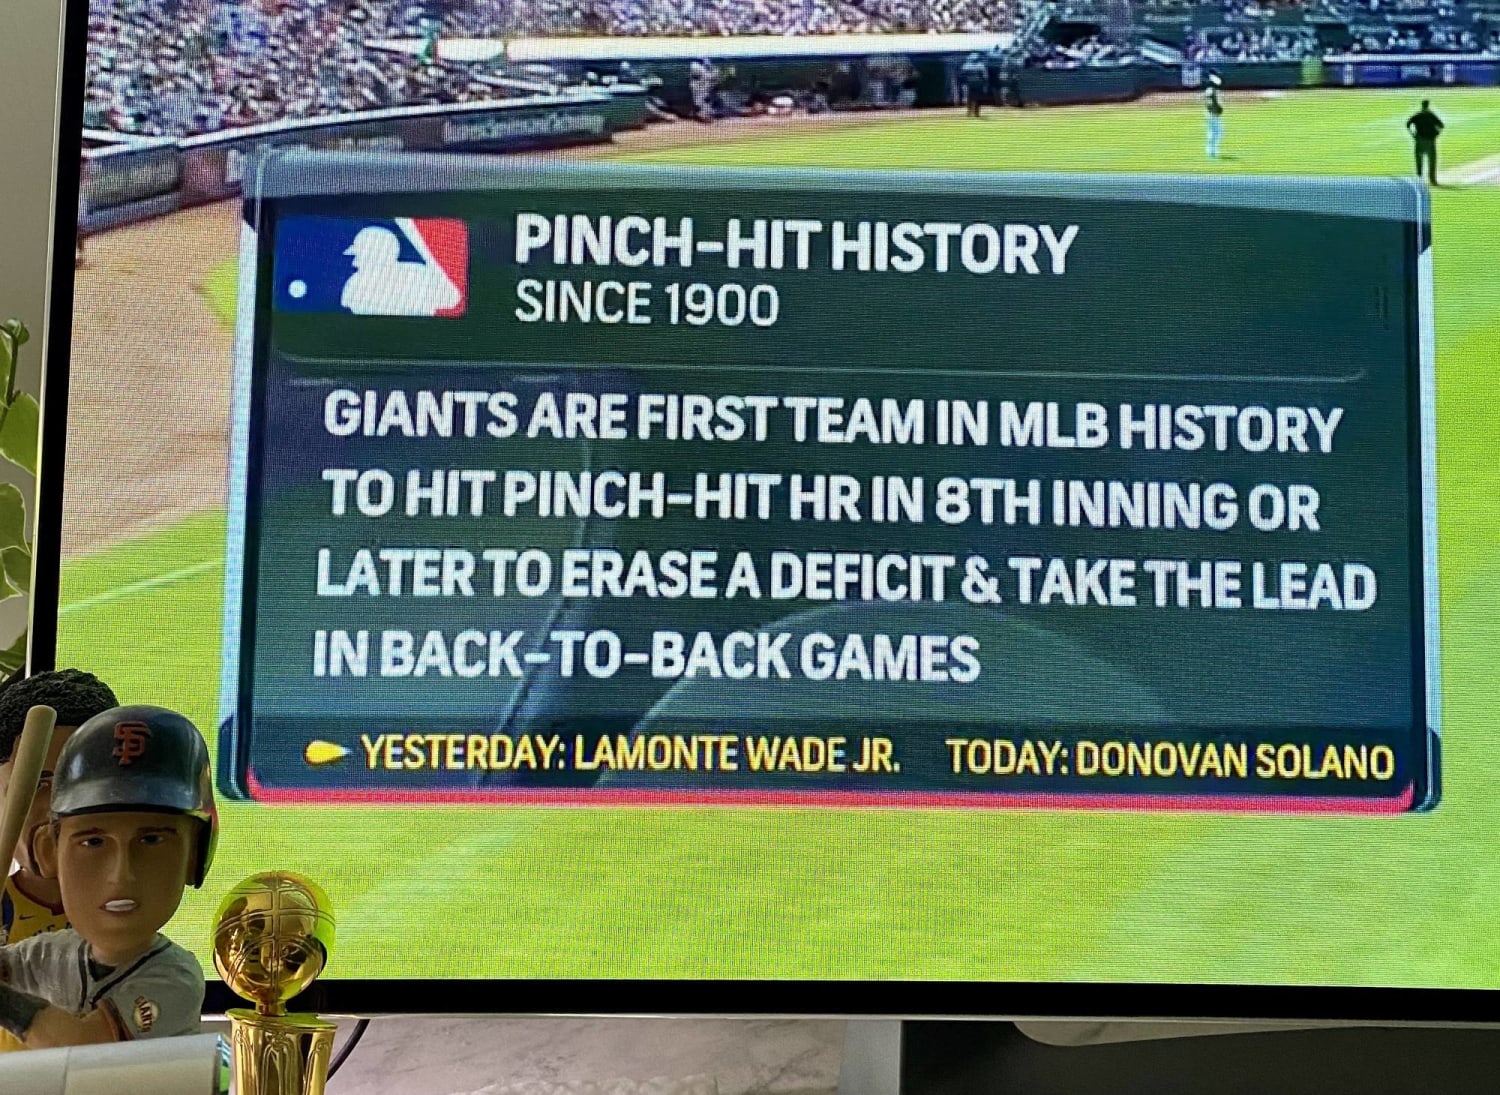 SF Giants are the first team in MLB History to pinch-hit homerun in the 8th inning or later to erase a deficit & take the lead in back-to-back games